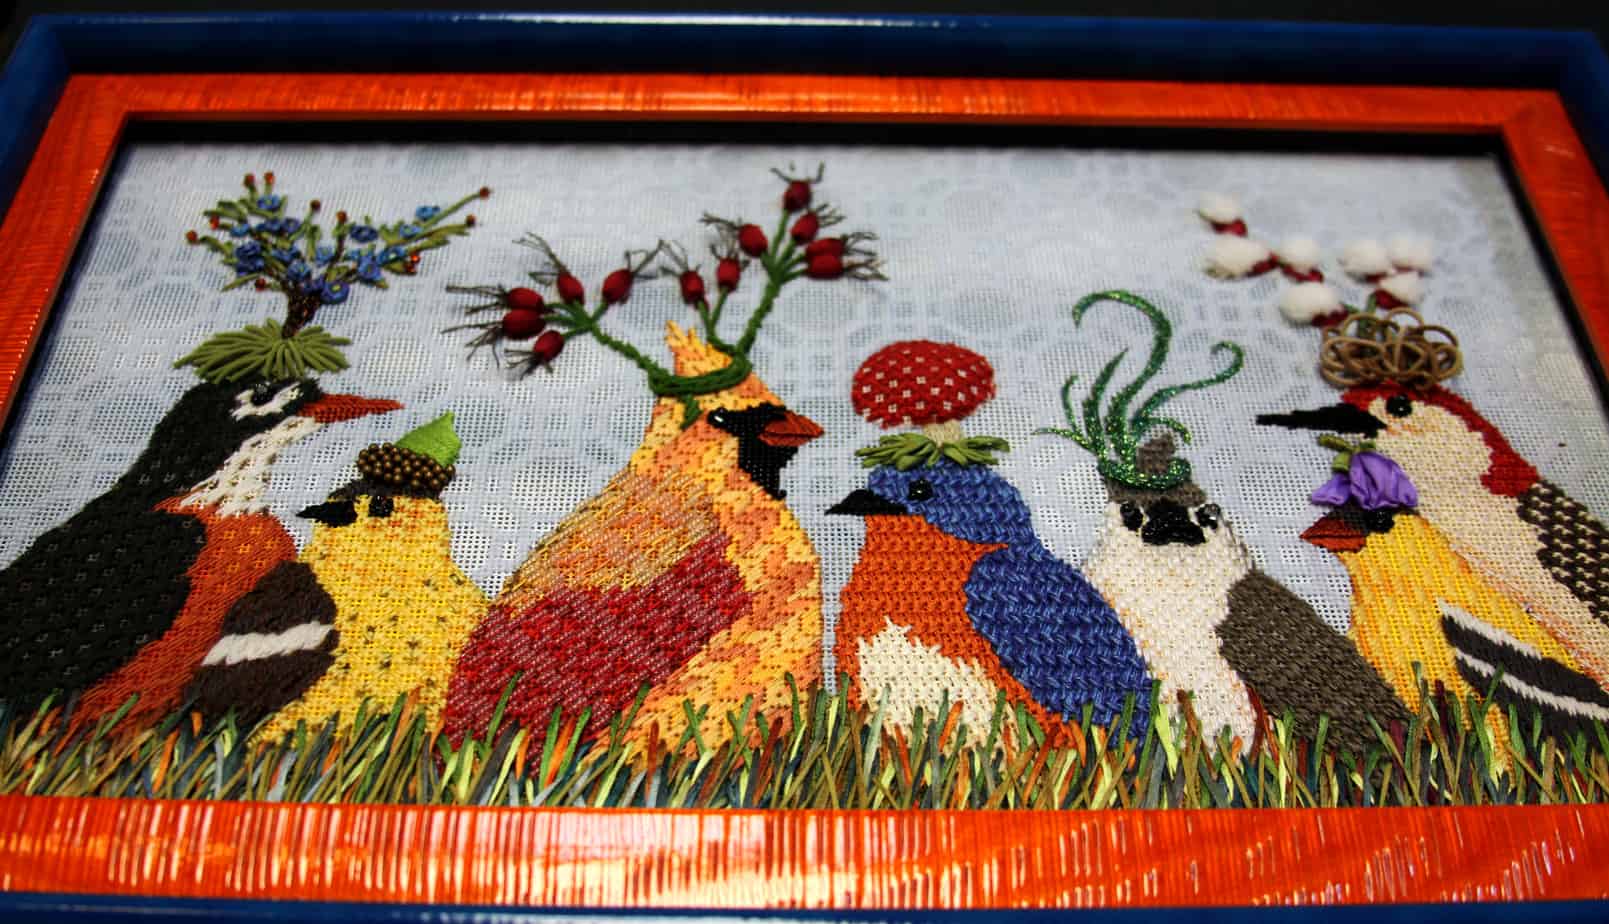 Needlepoint artwork of multicolored birds wearing plant-inspired hats.